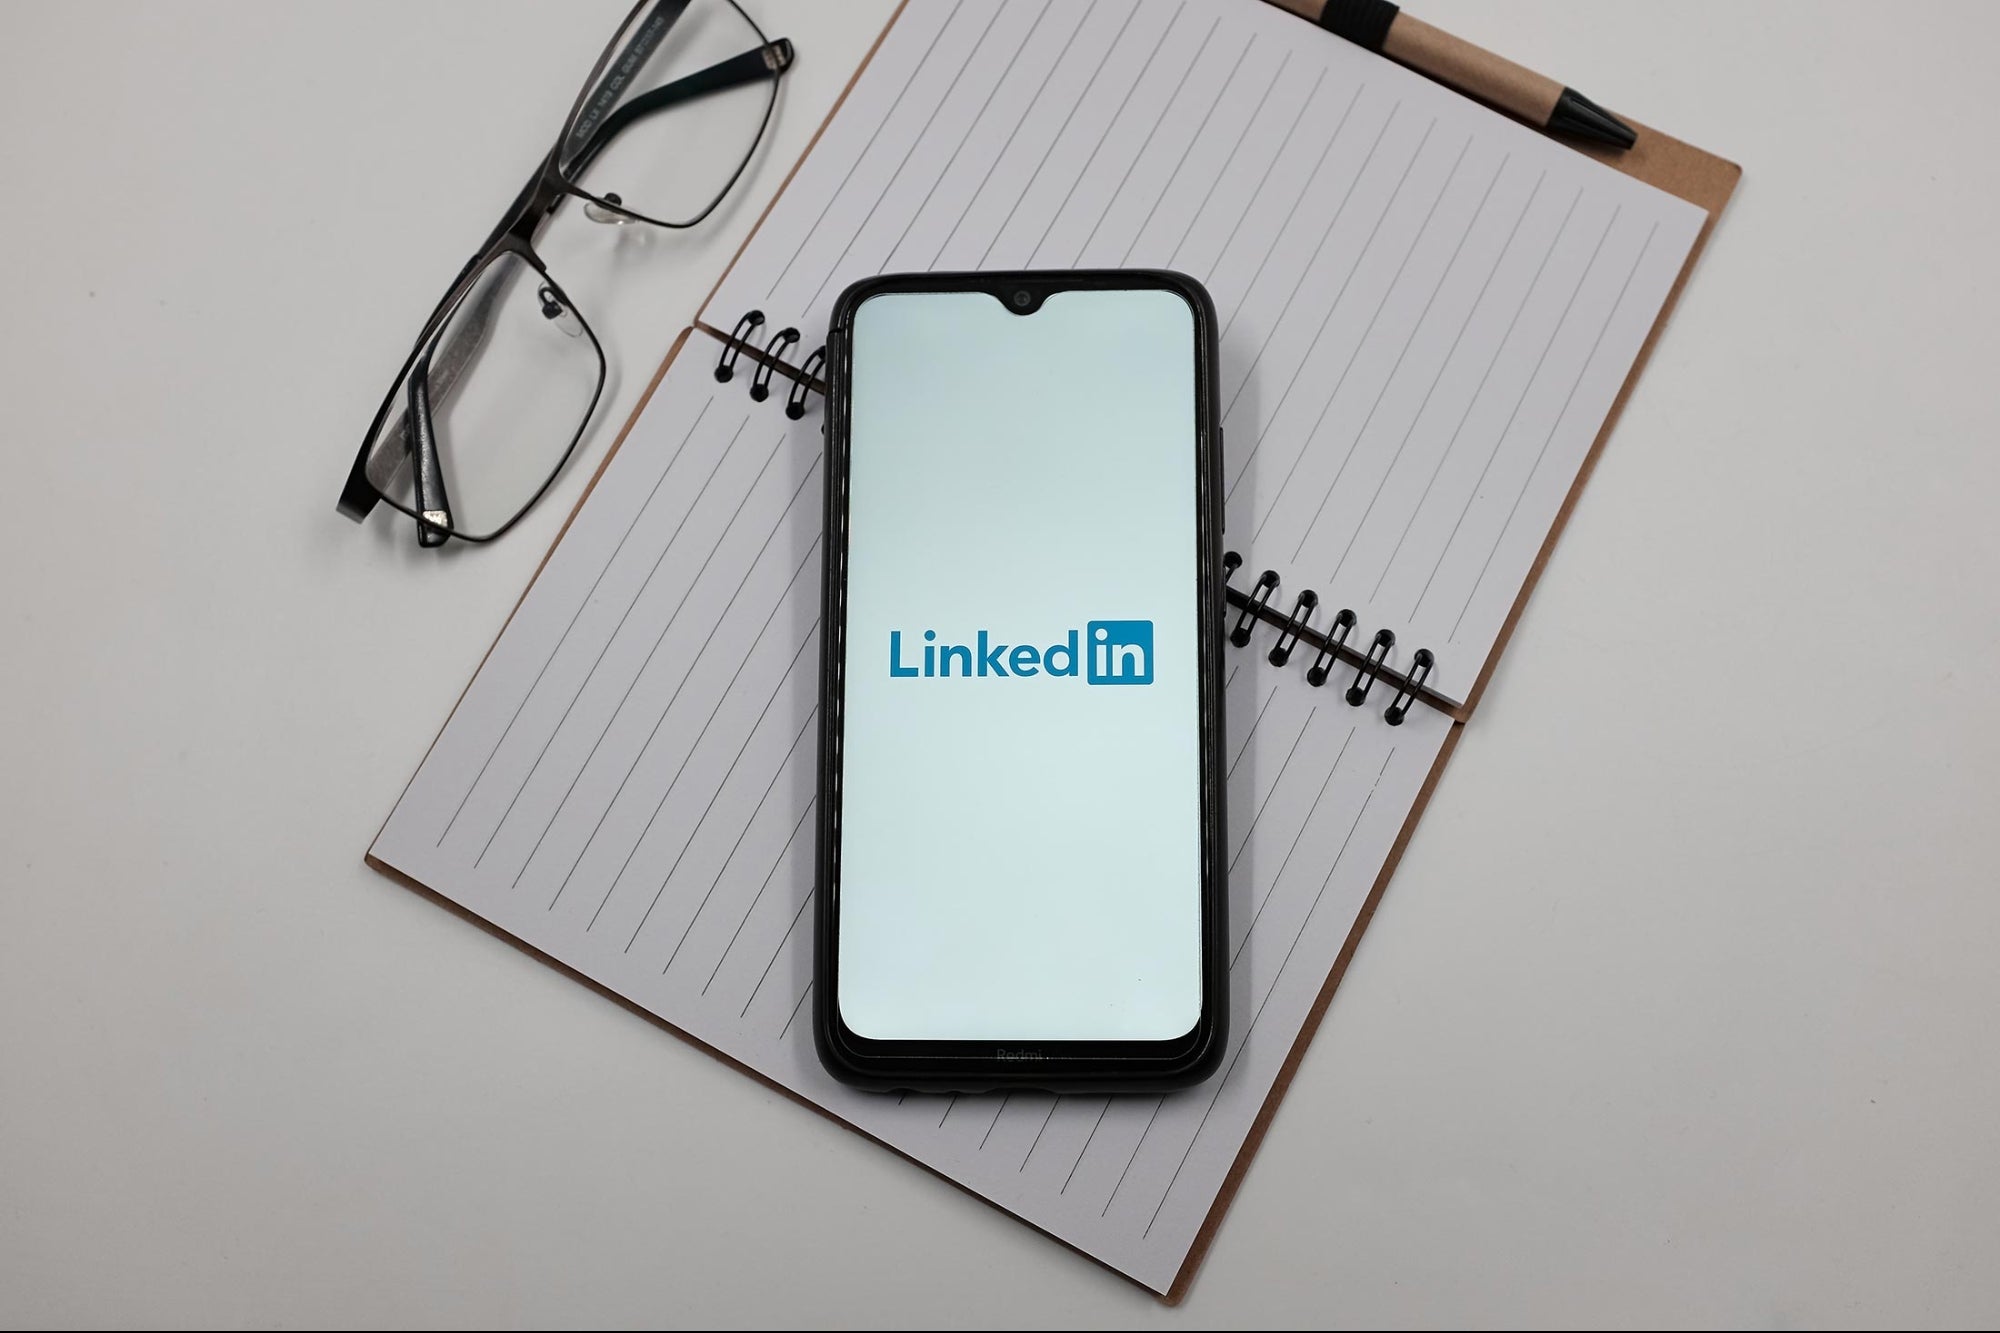 How to Build Their Personal Brand on LinkedIn as an Entrepreneur